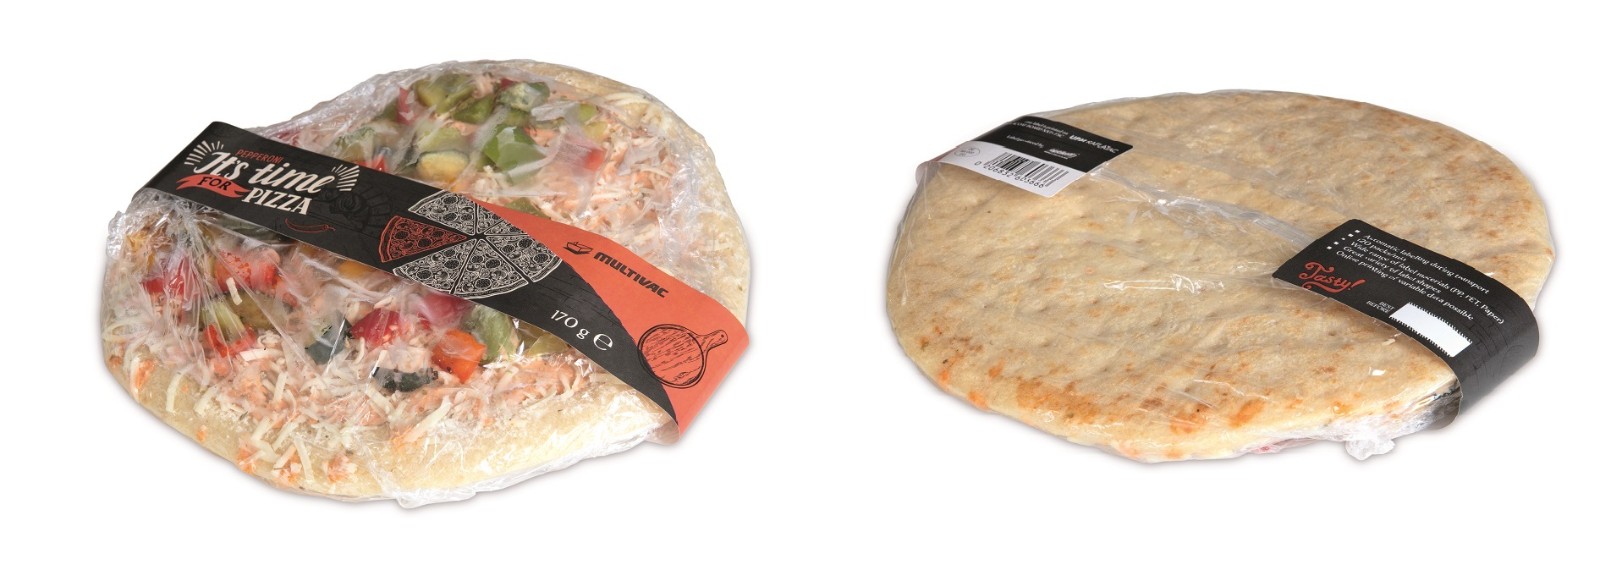 multivac-Full Wrap Labelling_Pizza-front and back.jpg